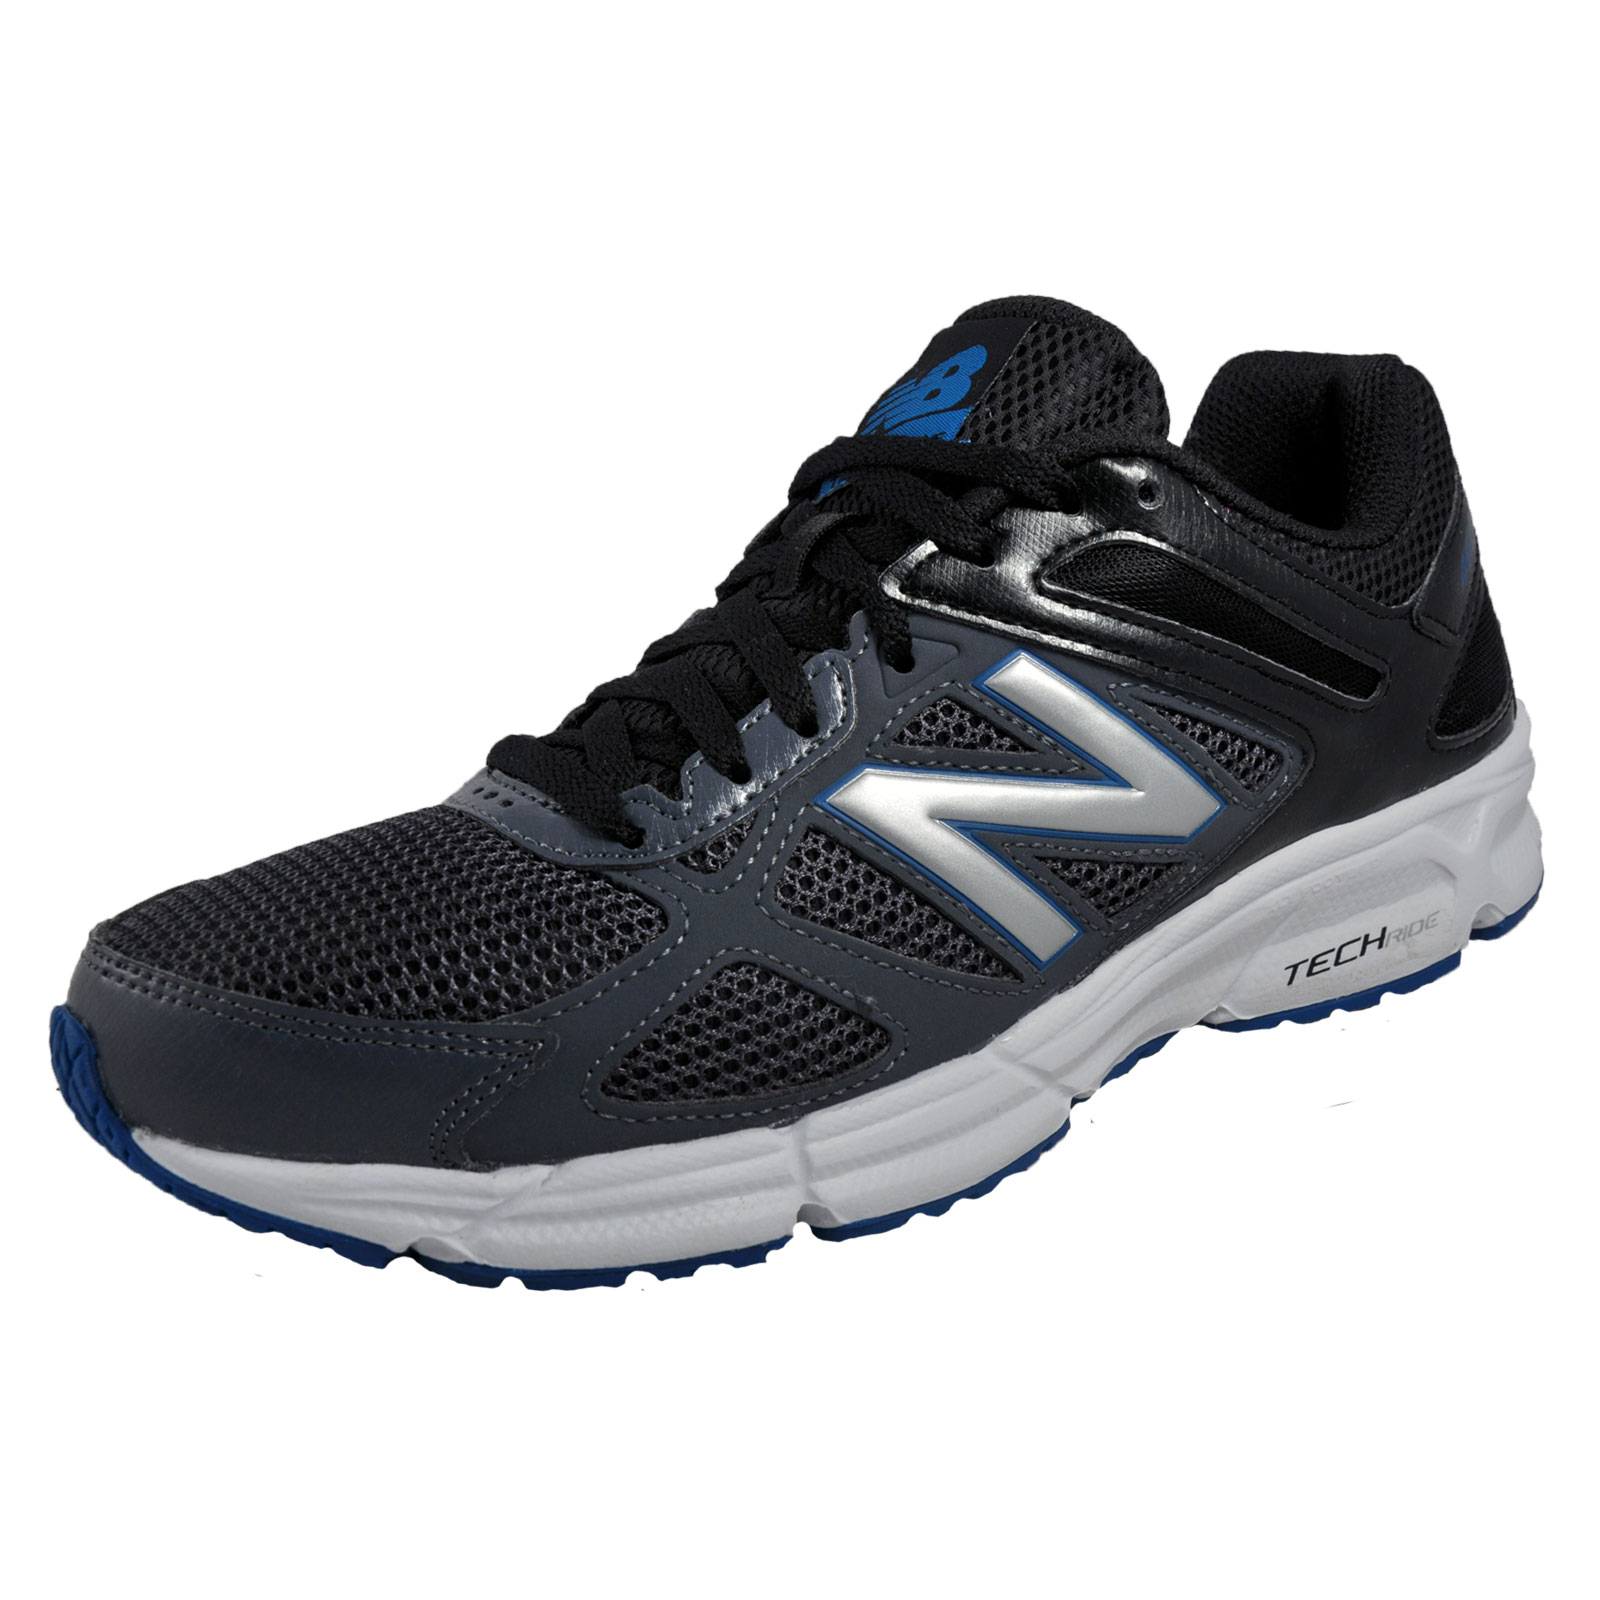 New Balance 460 TechRide Mens Running Shoes Fitness Gym Trainers Grey ...